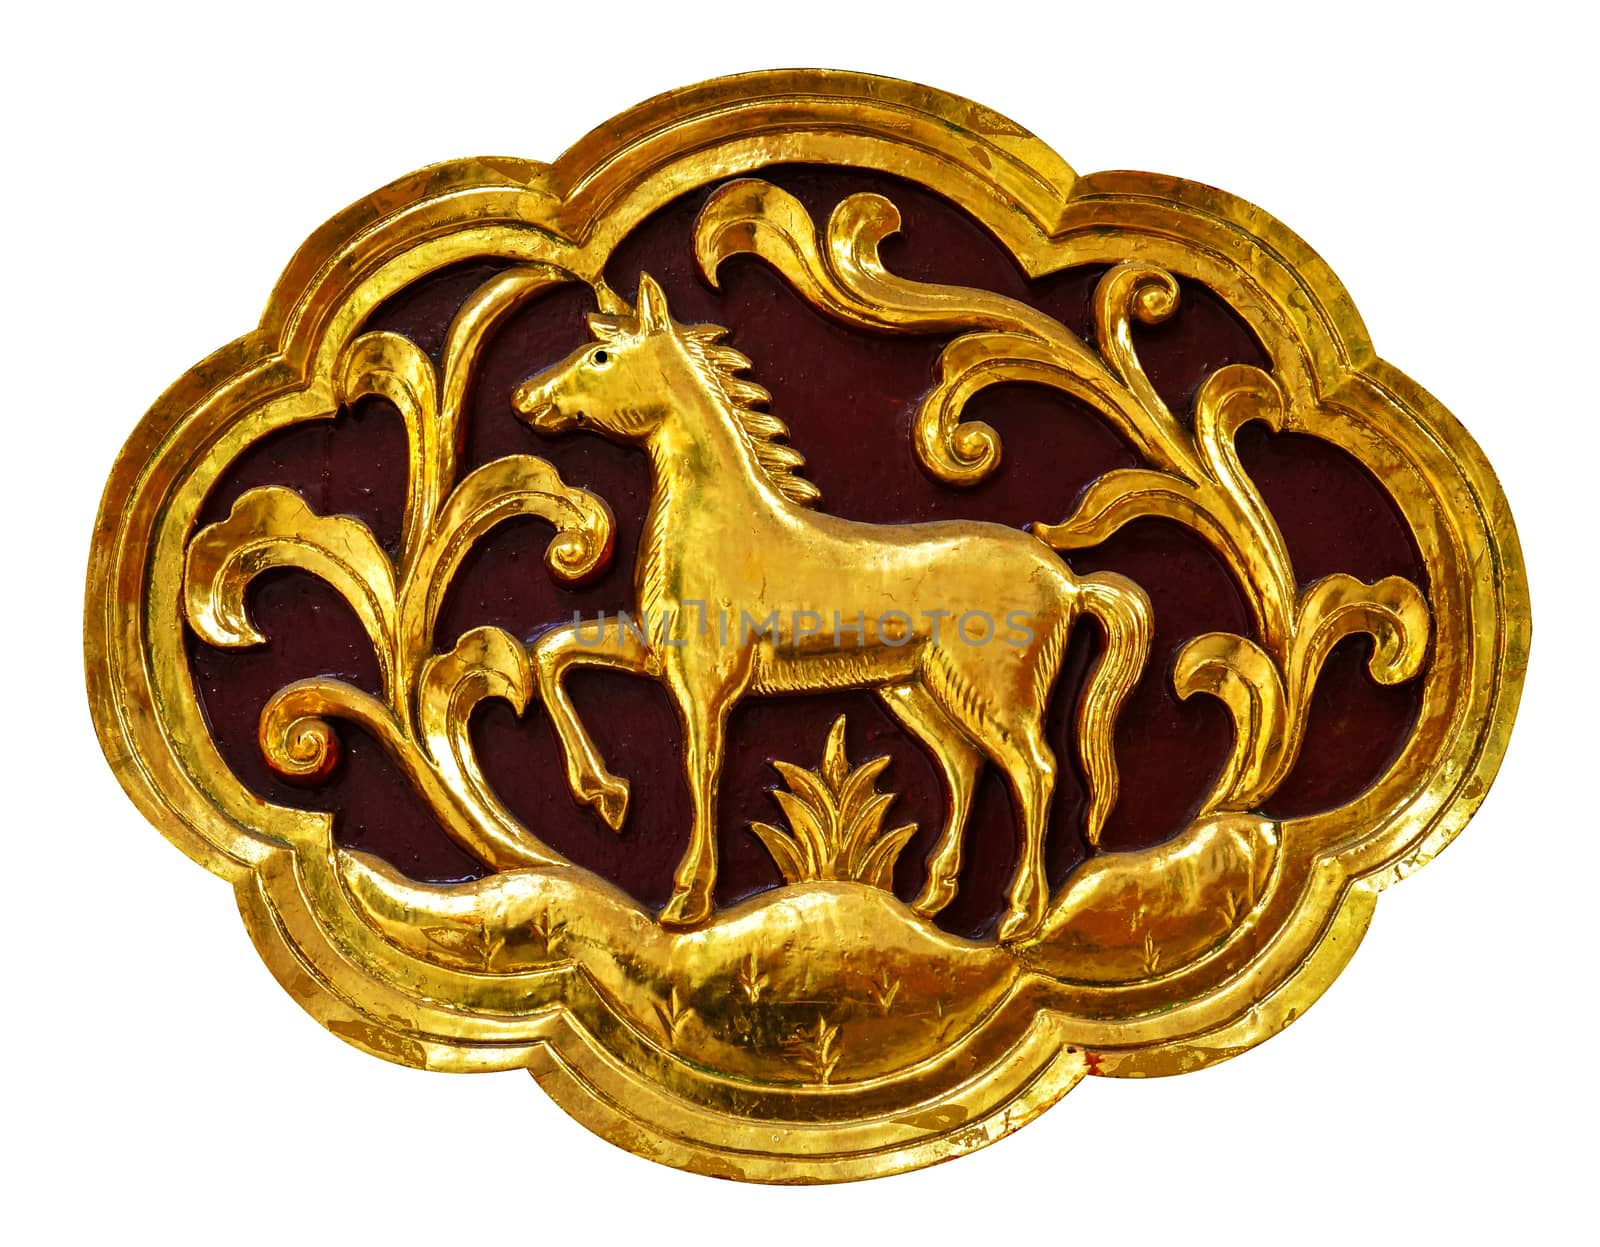 Wooden carved animals, painted gold.